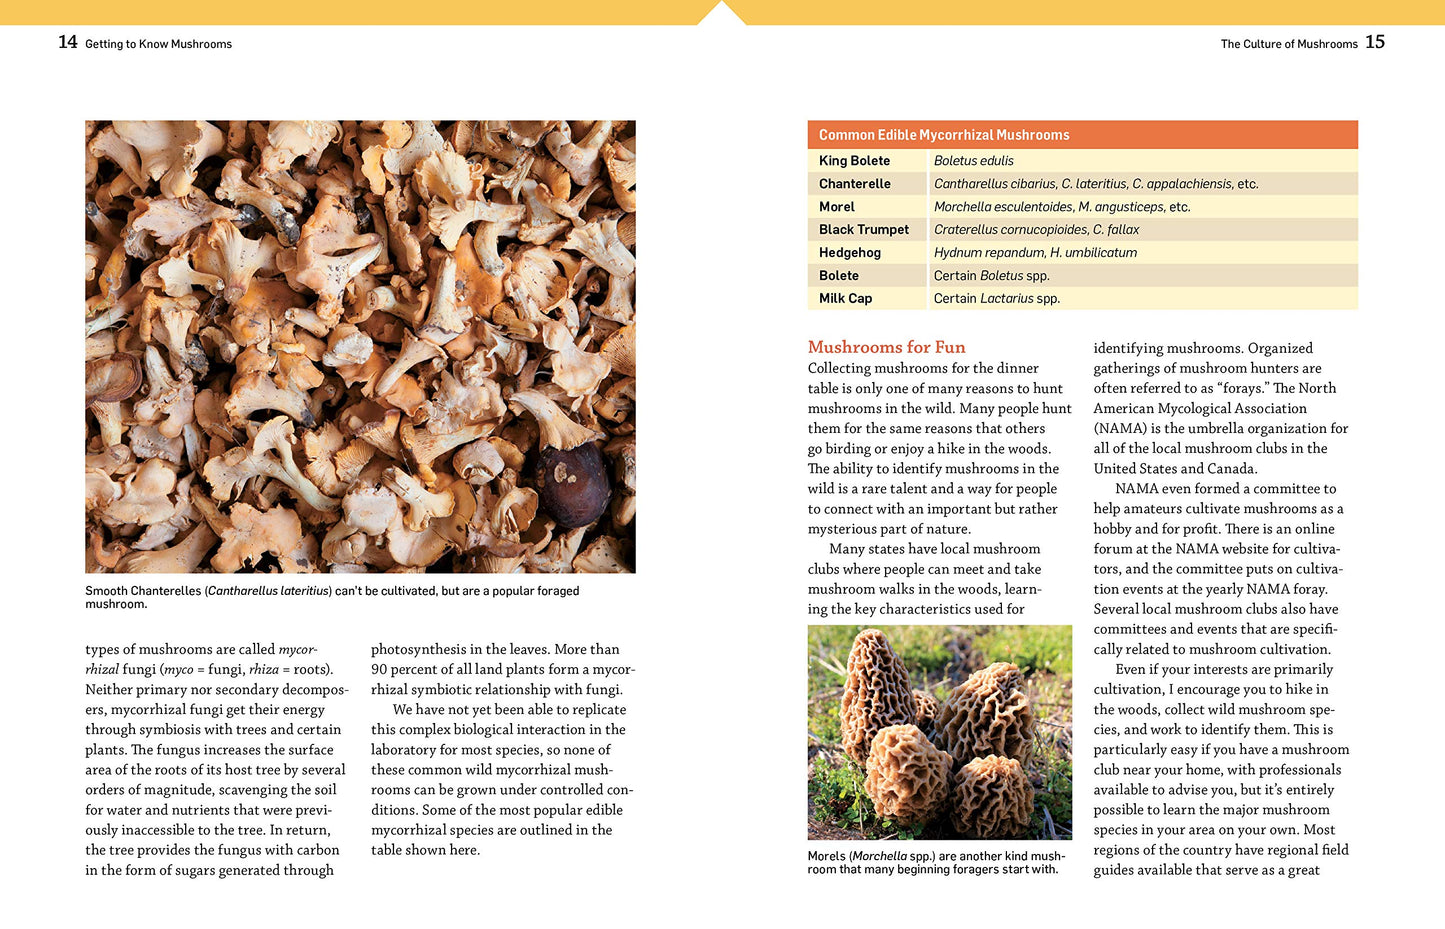 The Essential Guide to Cultivating Mushrooms by Stephen Russell